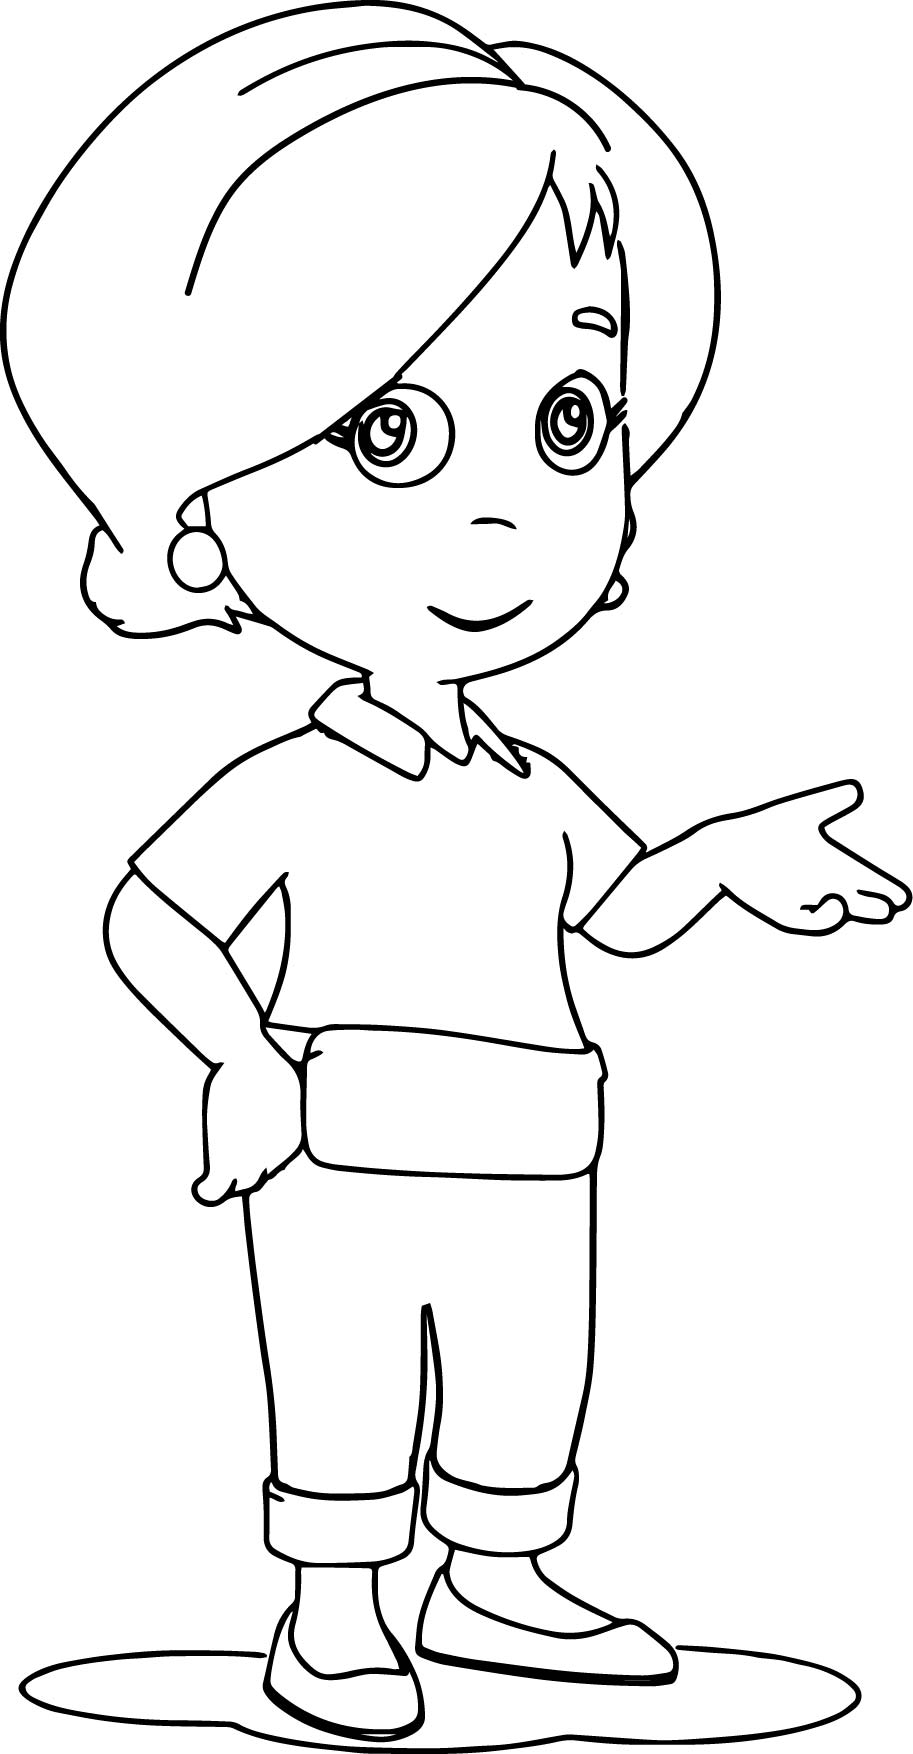 Kelly Handy Manny Coloring Page Wecoloringpage.com